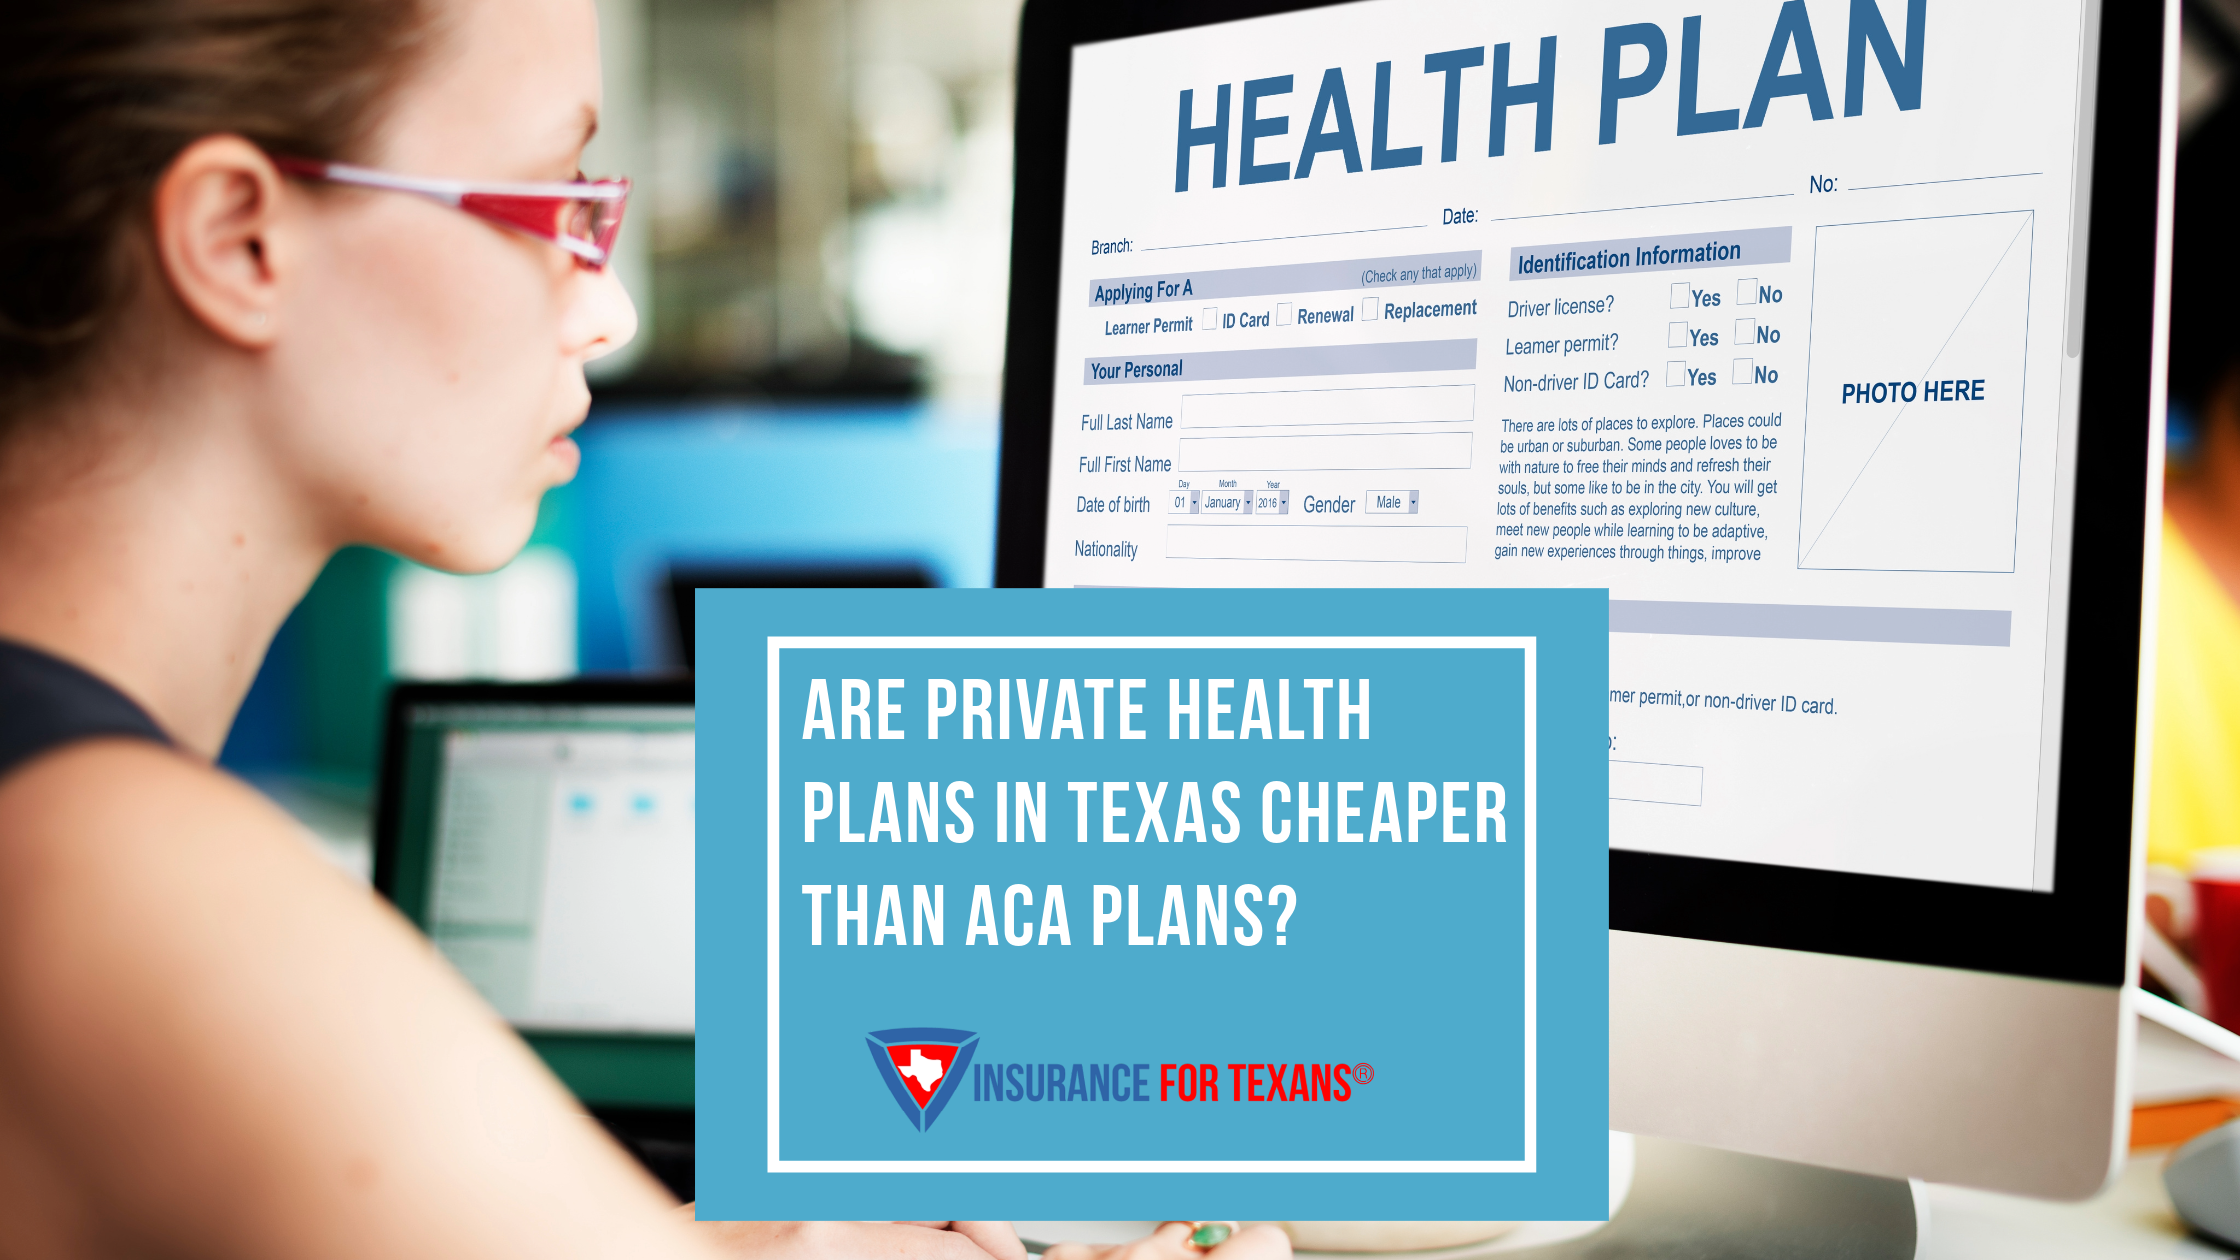 Are Private Health Plans in Texas Cheaper Than ACA Plans?